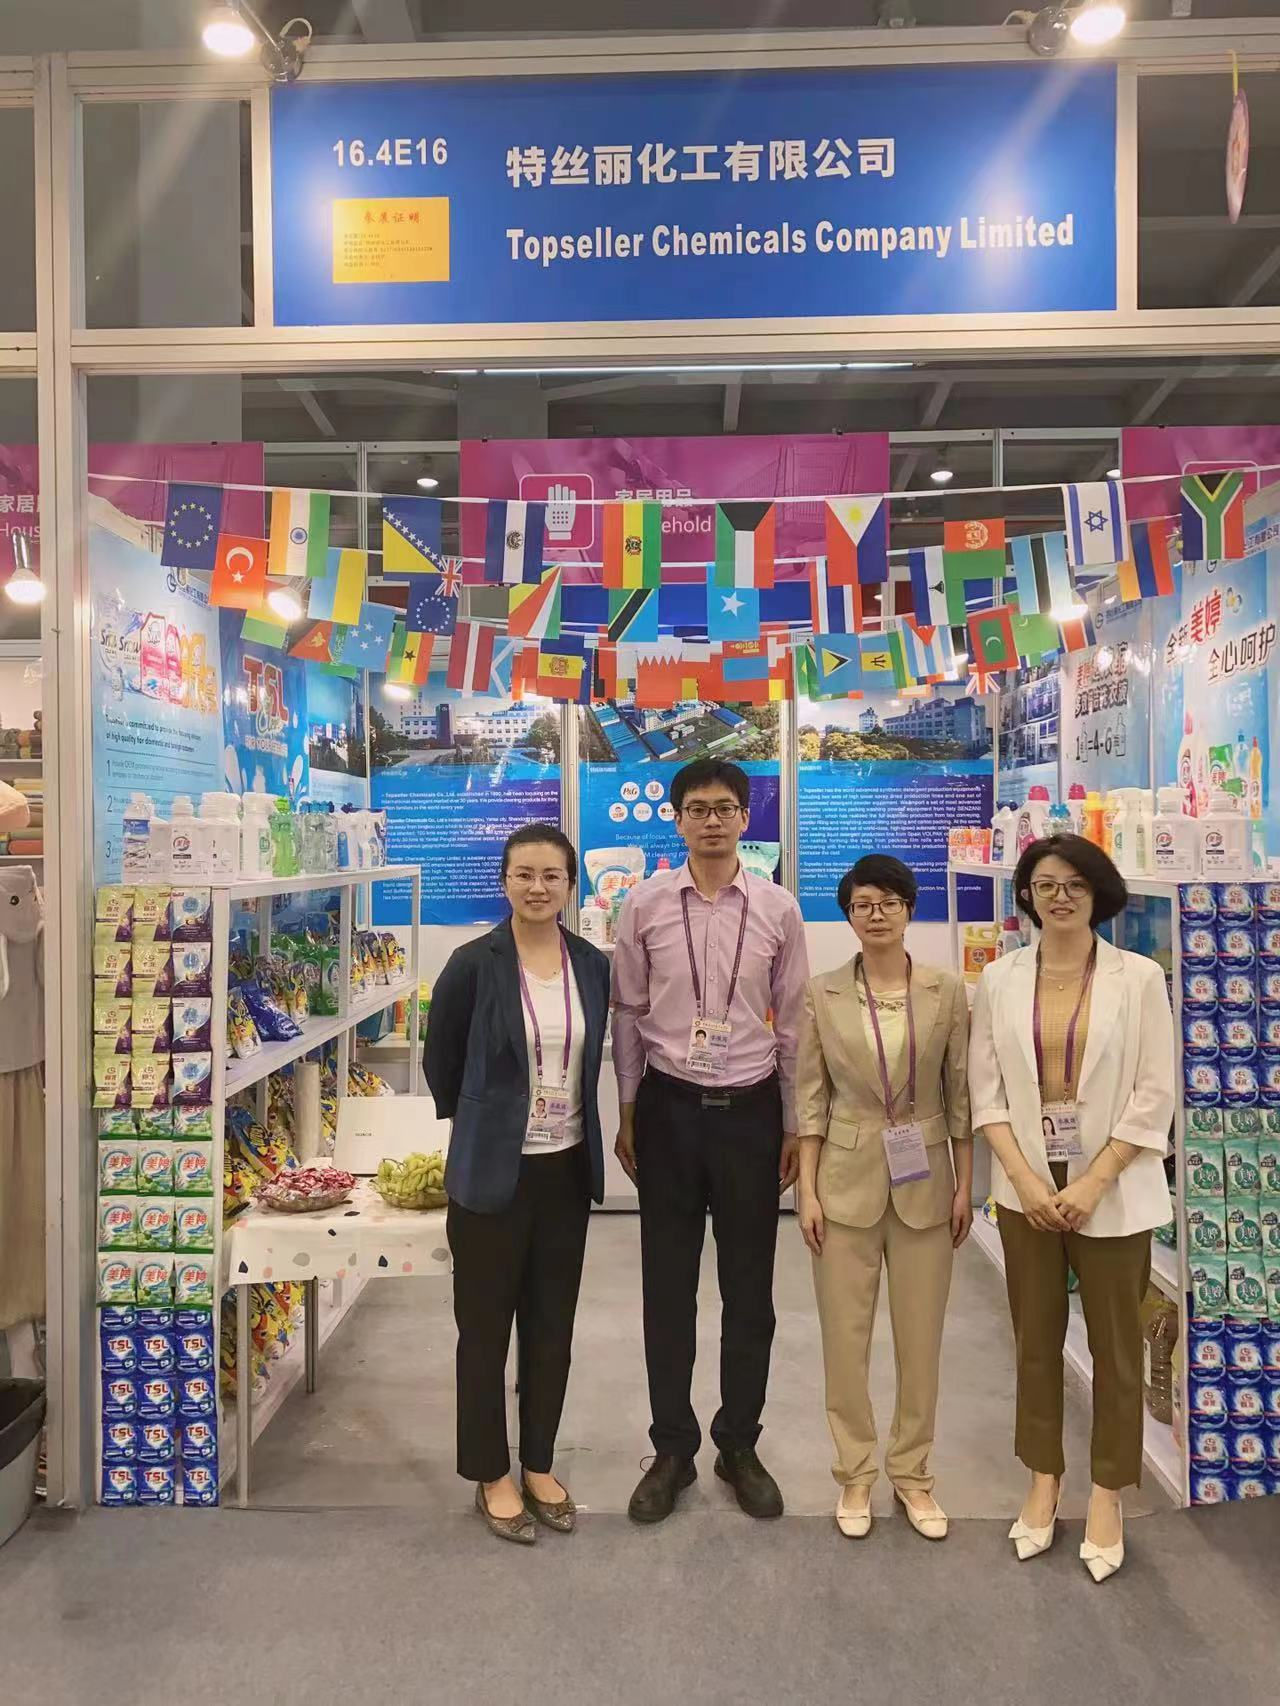 Welcome to The 133rd Canton Fair